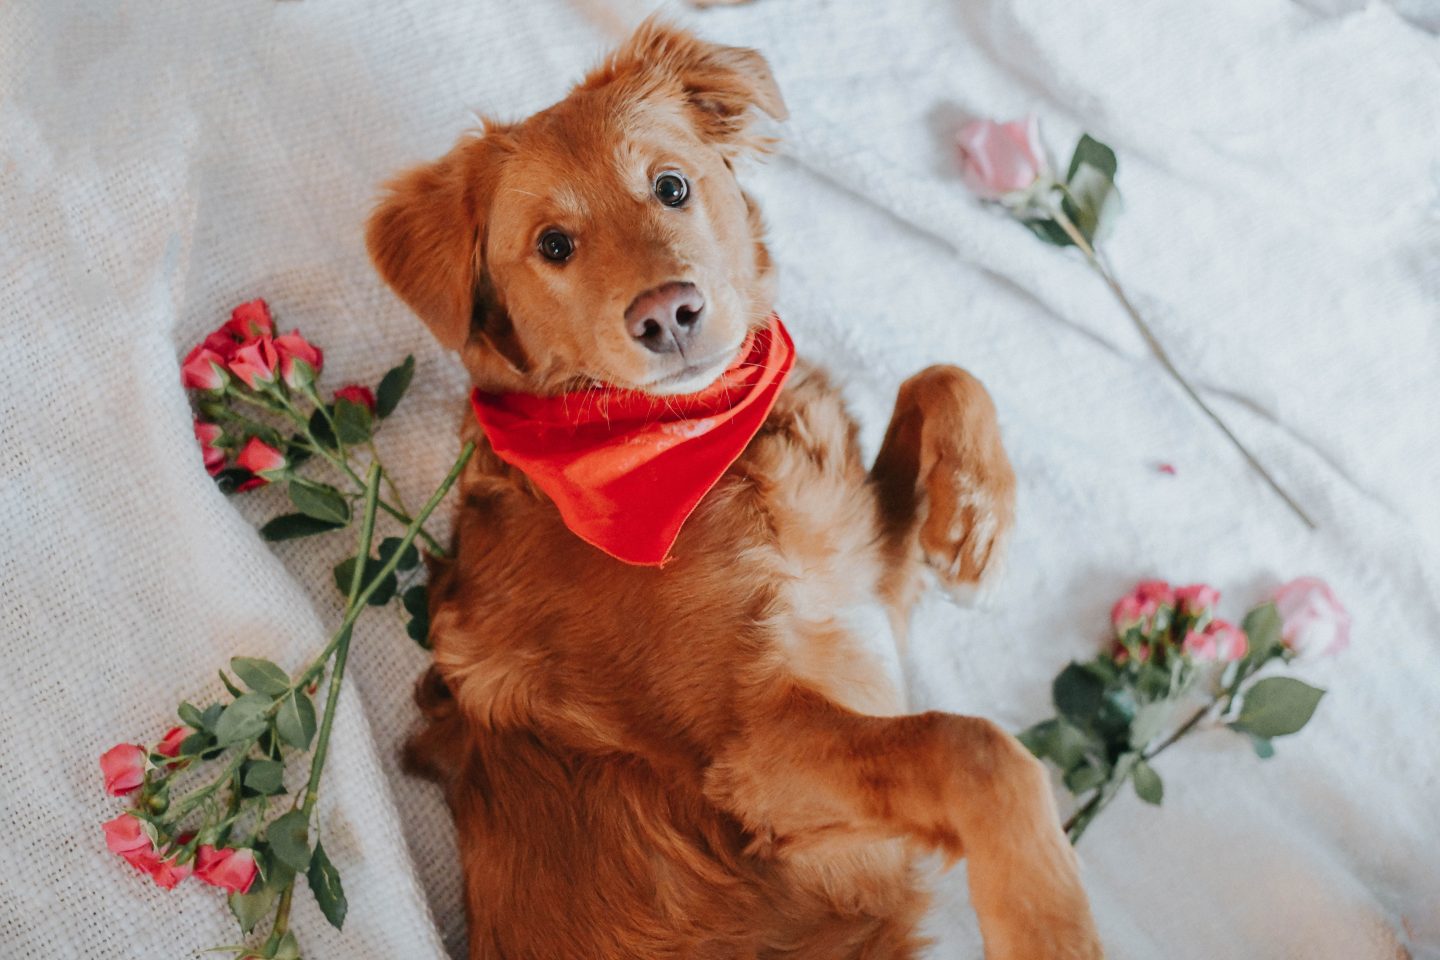 dog laying in bed surrounded by flowers